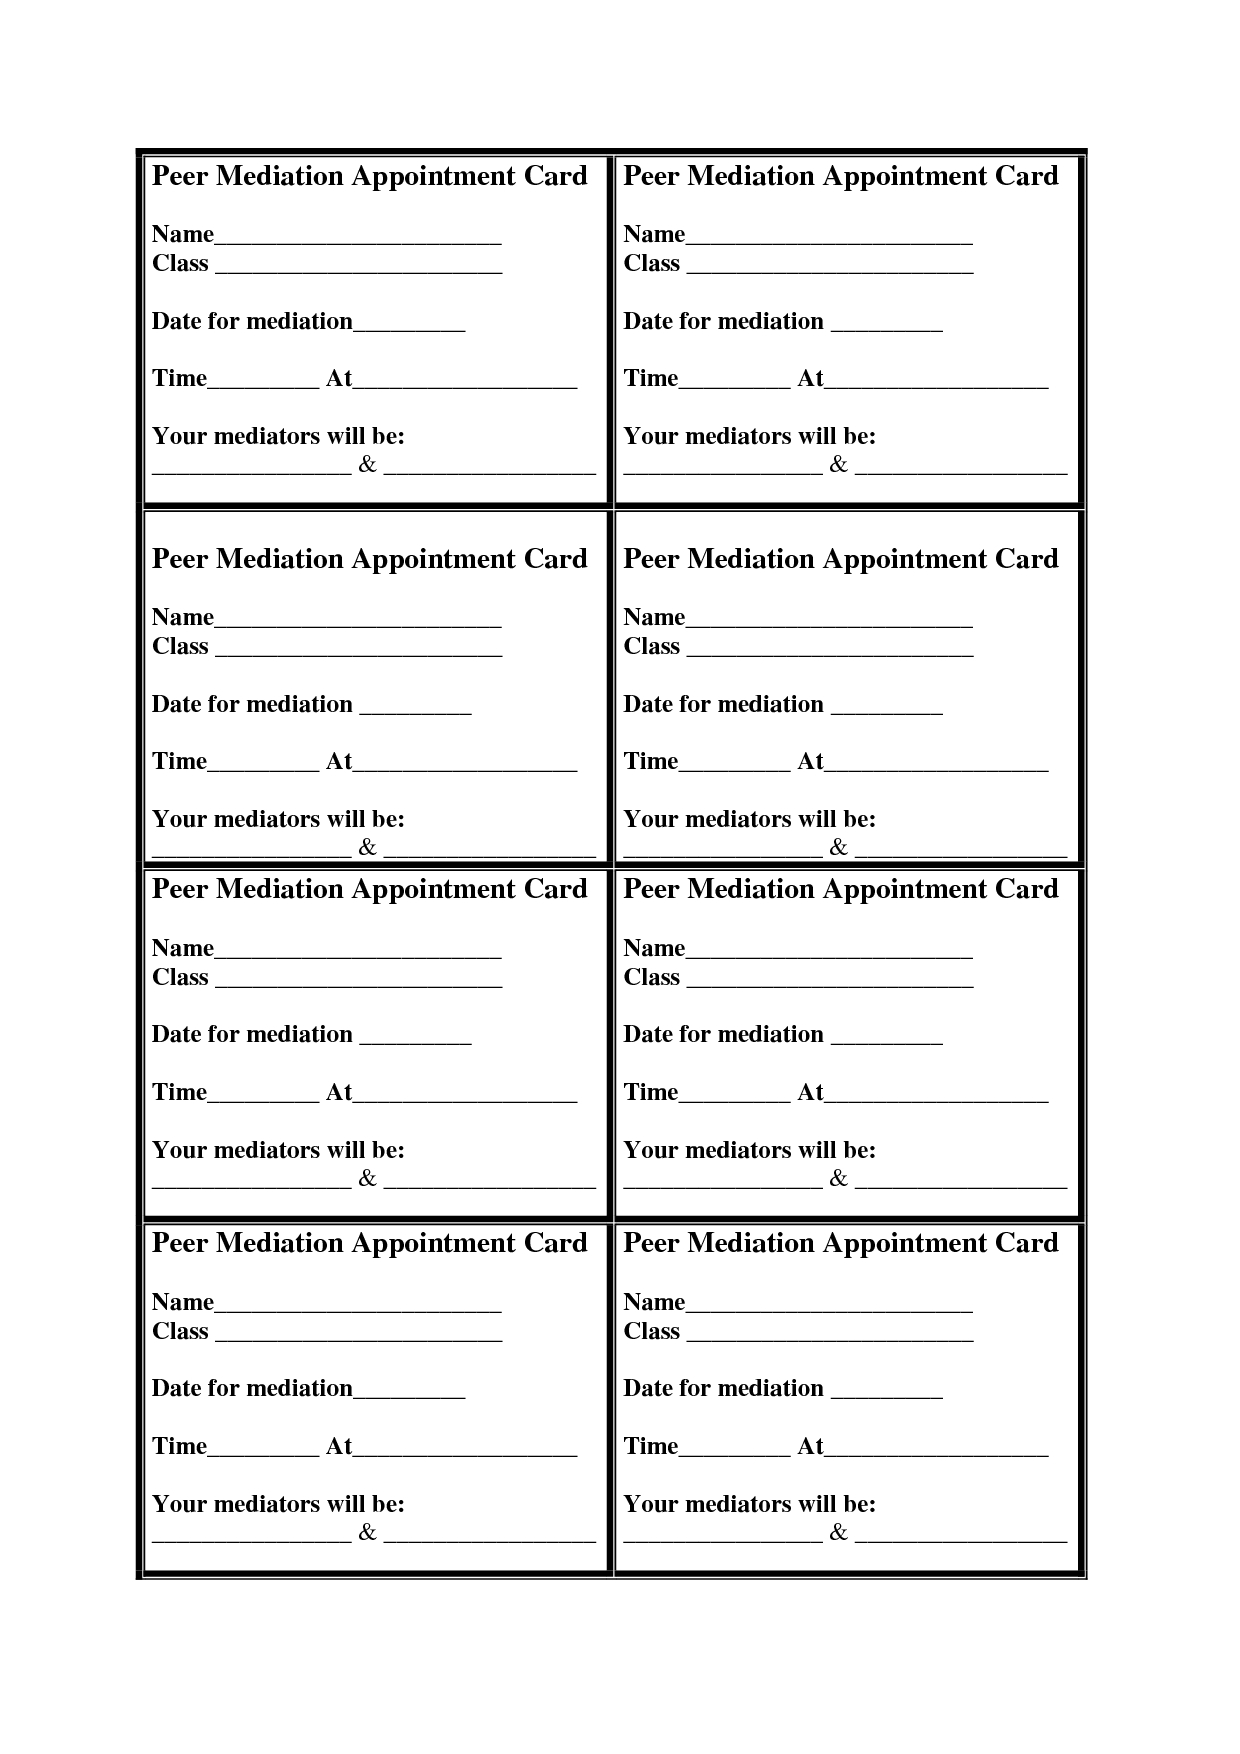 Medical Appointment Cards Templates Regarding Medical Appointment Card Template Free